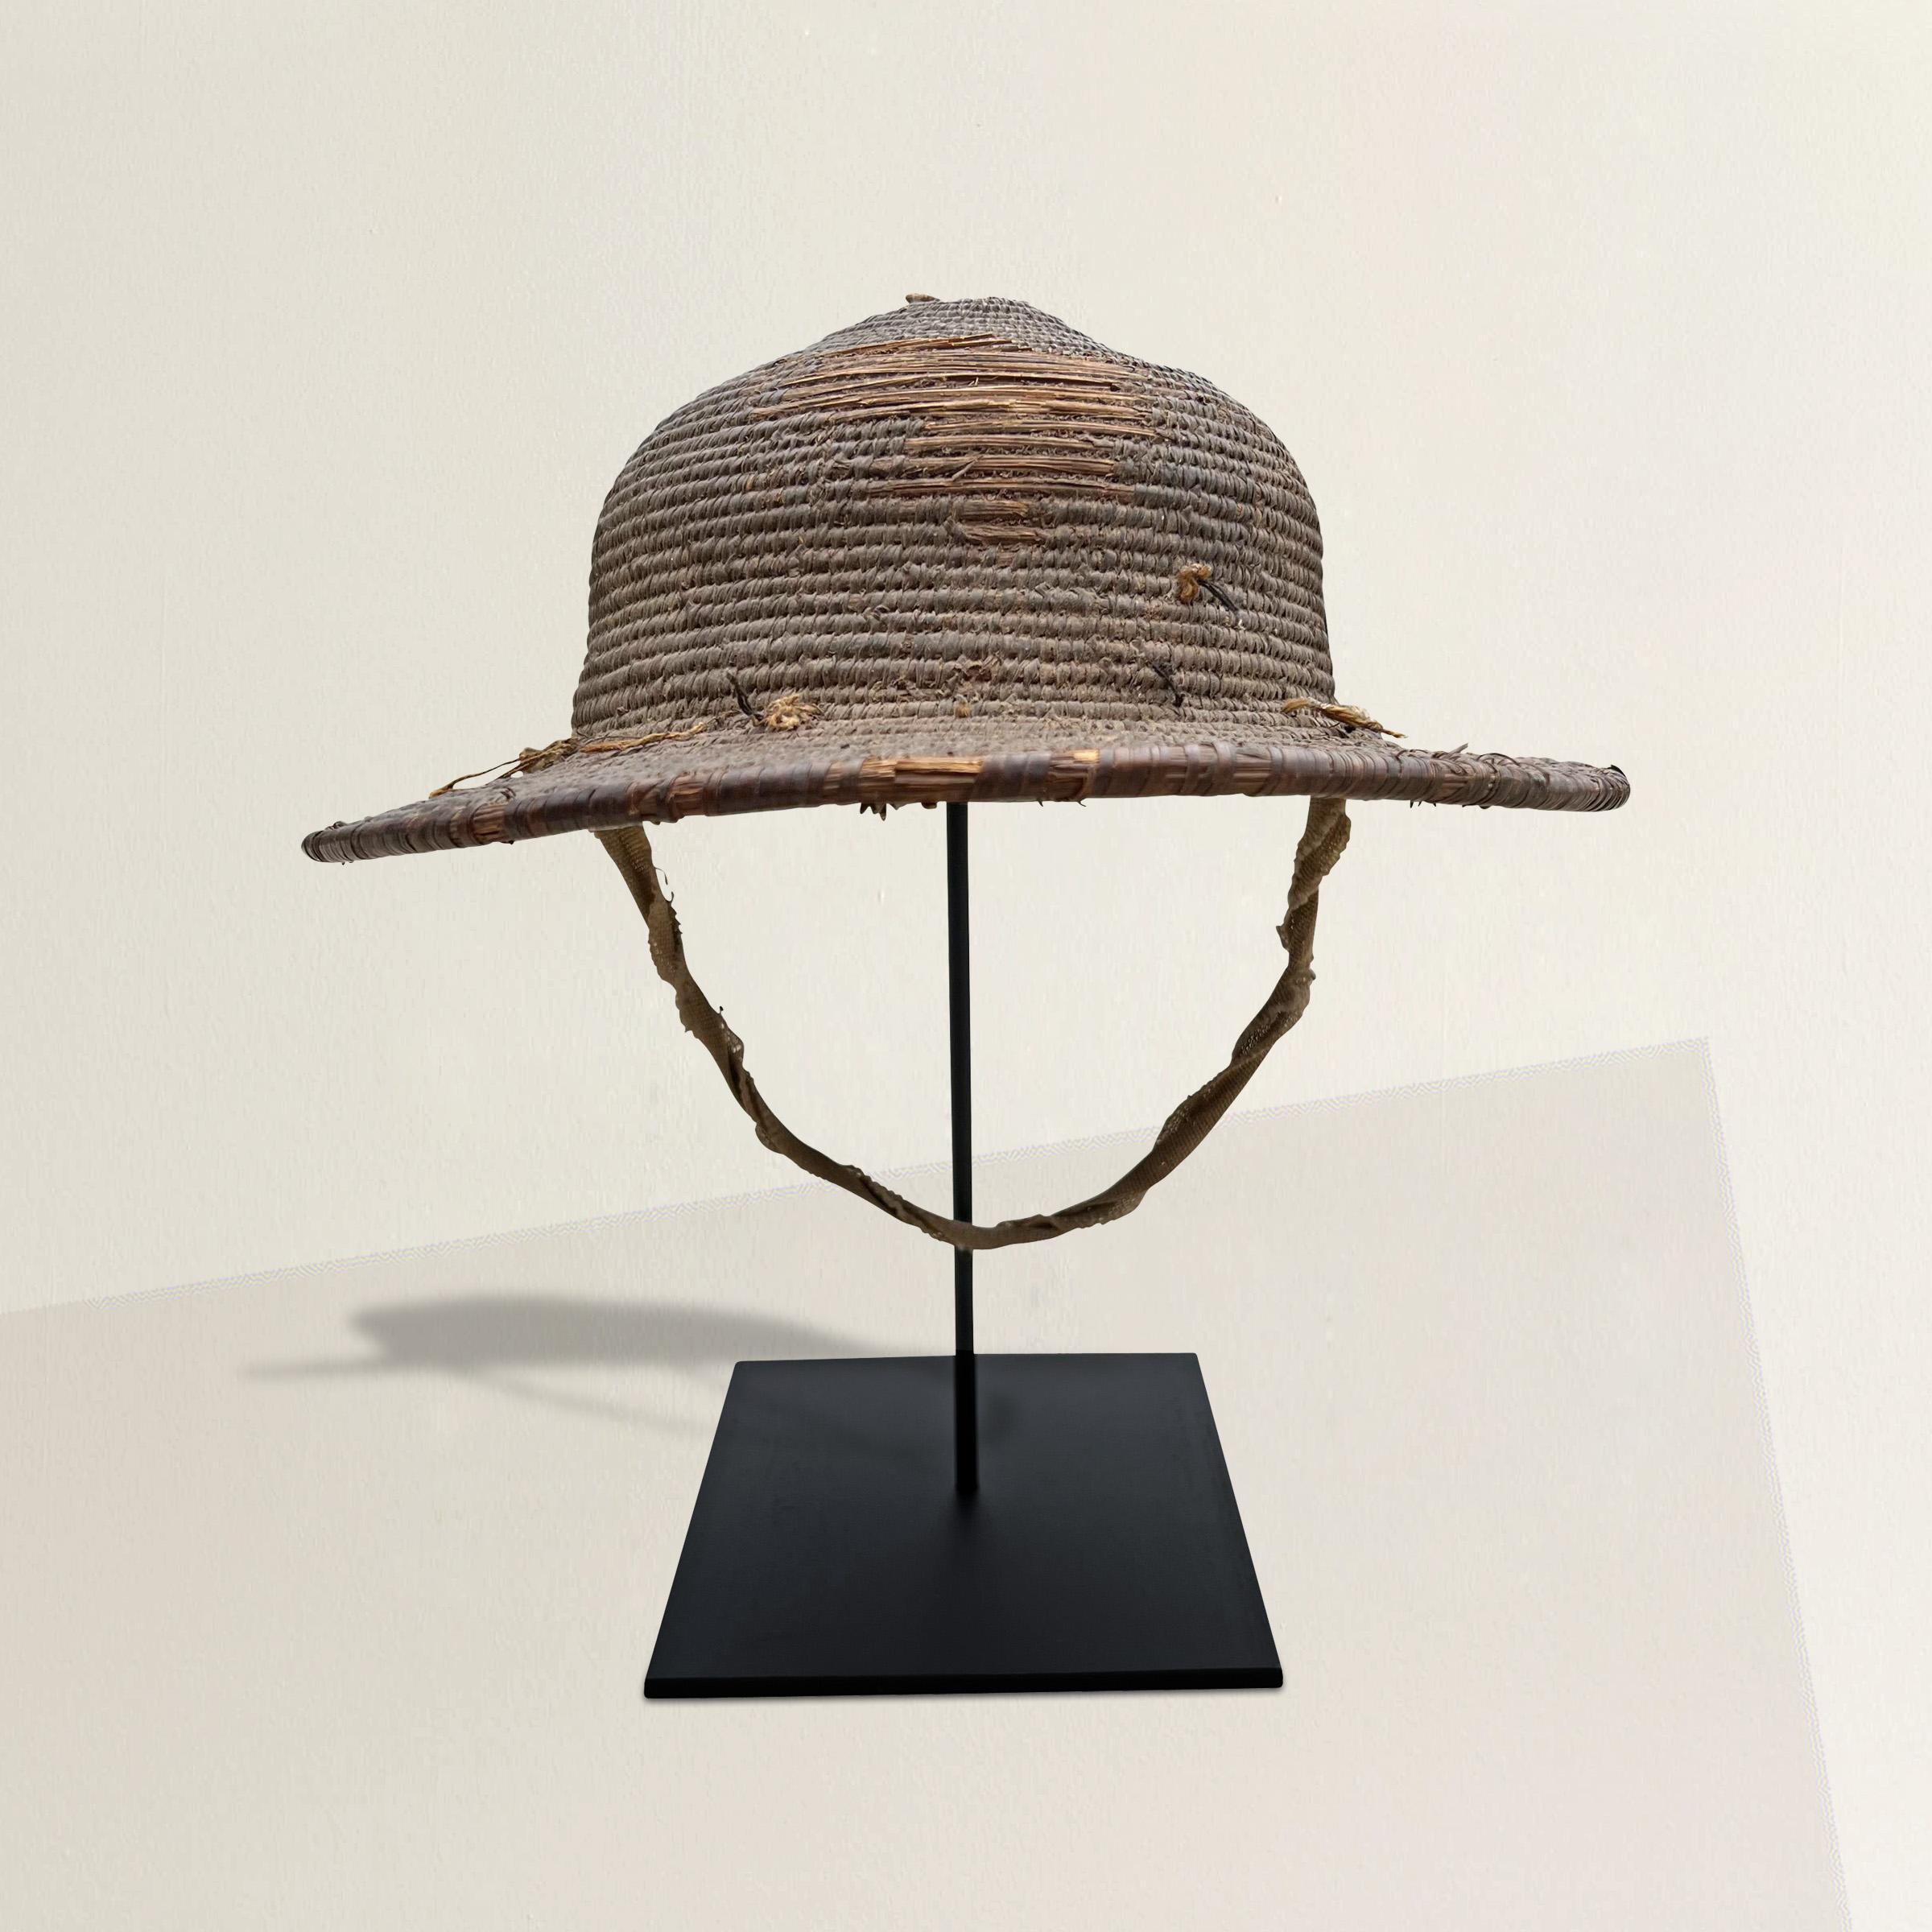 A wonderful mid-20th century Nigerian woven fiber hat with a wide brim, chin strap, and mounted on a custom steel mount.